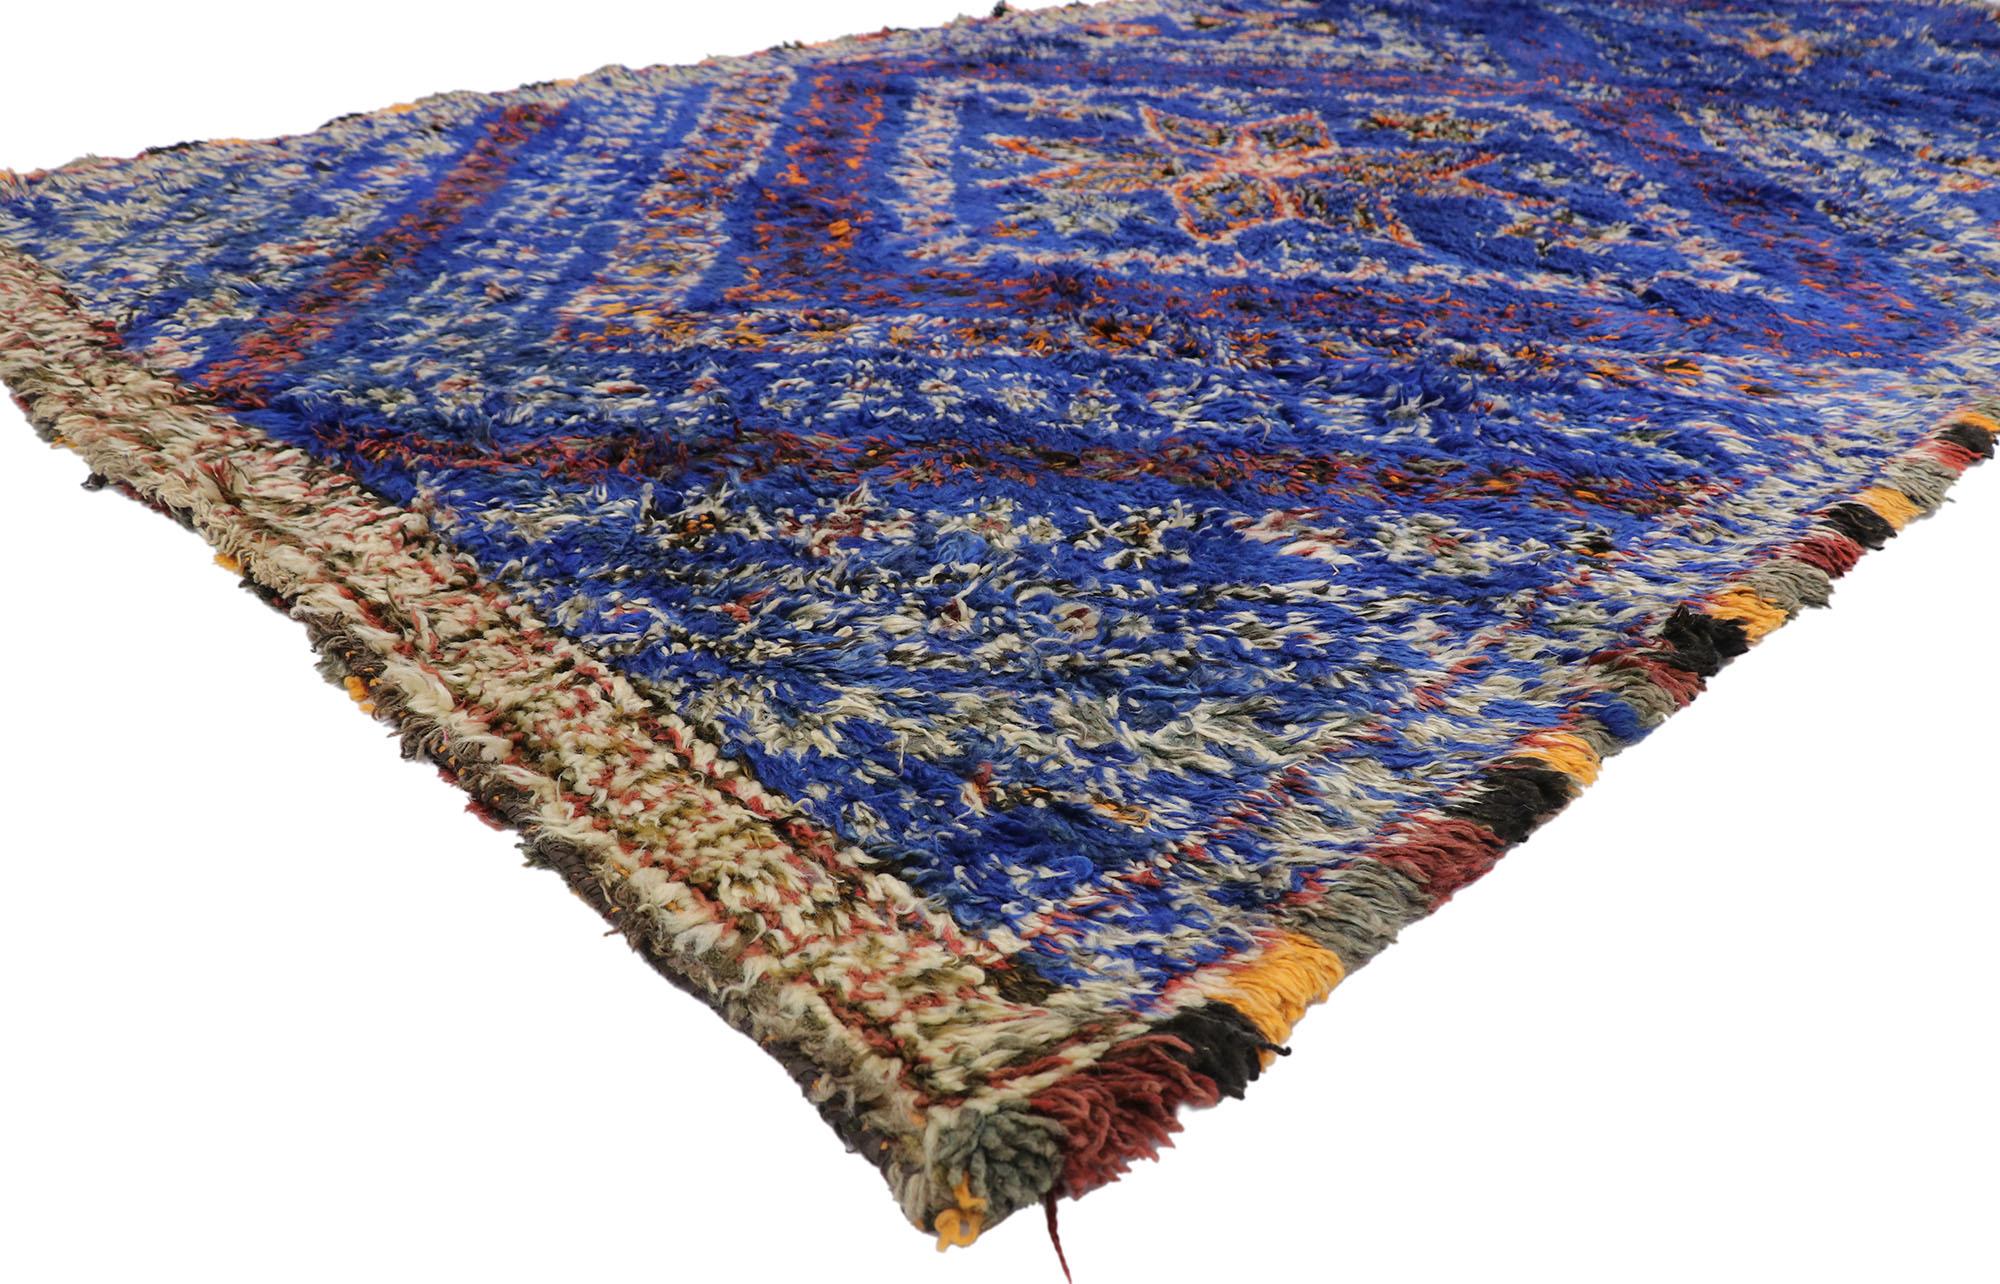 21337 Vintage Berber Blue Beni M'Guild Moroccan rug with Tribal Style 06'08 x 13'04. Showcasing a bold expressive design, incredible detail and texture, this hand knotted wool vintage Berber Beni M'Guild Moroccan rug is a captivating vision of woven